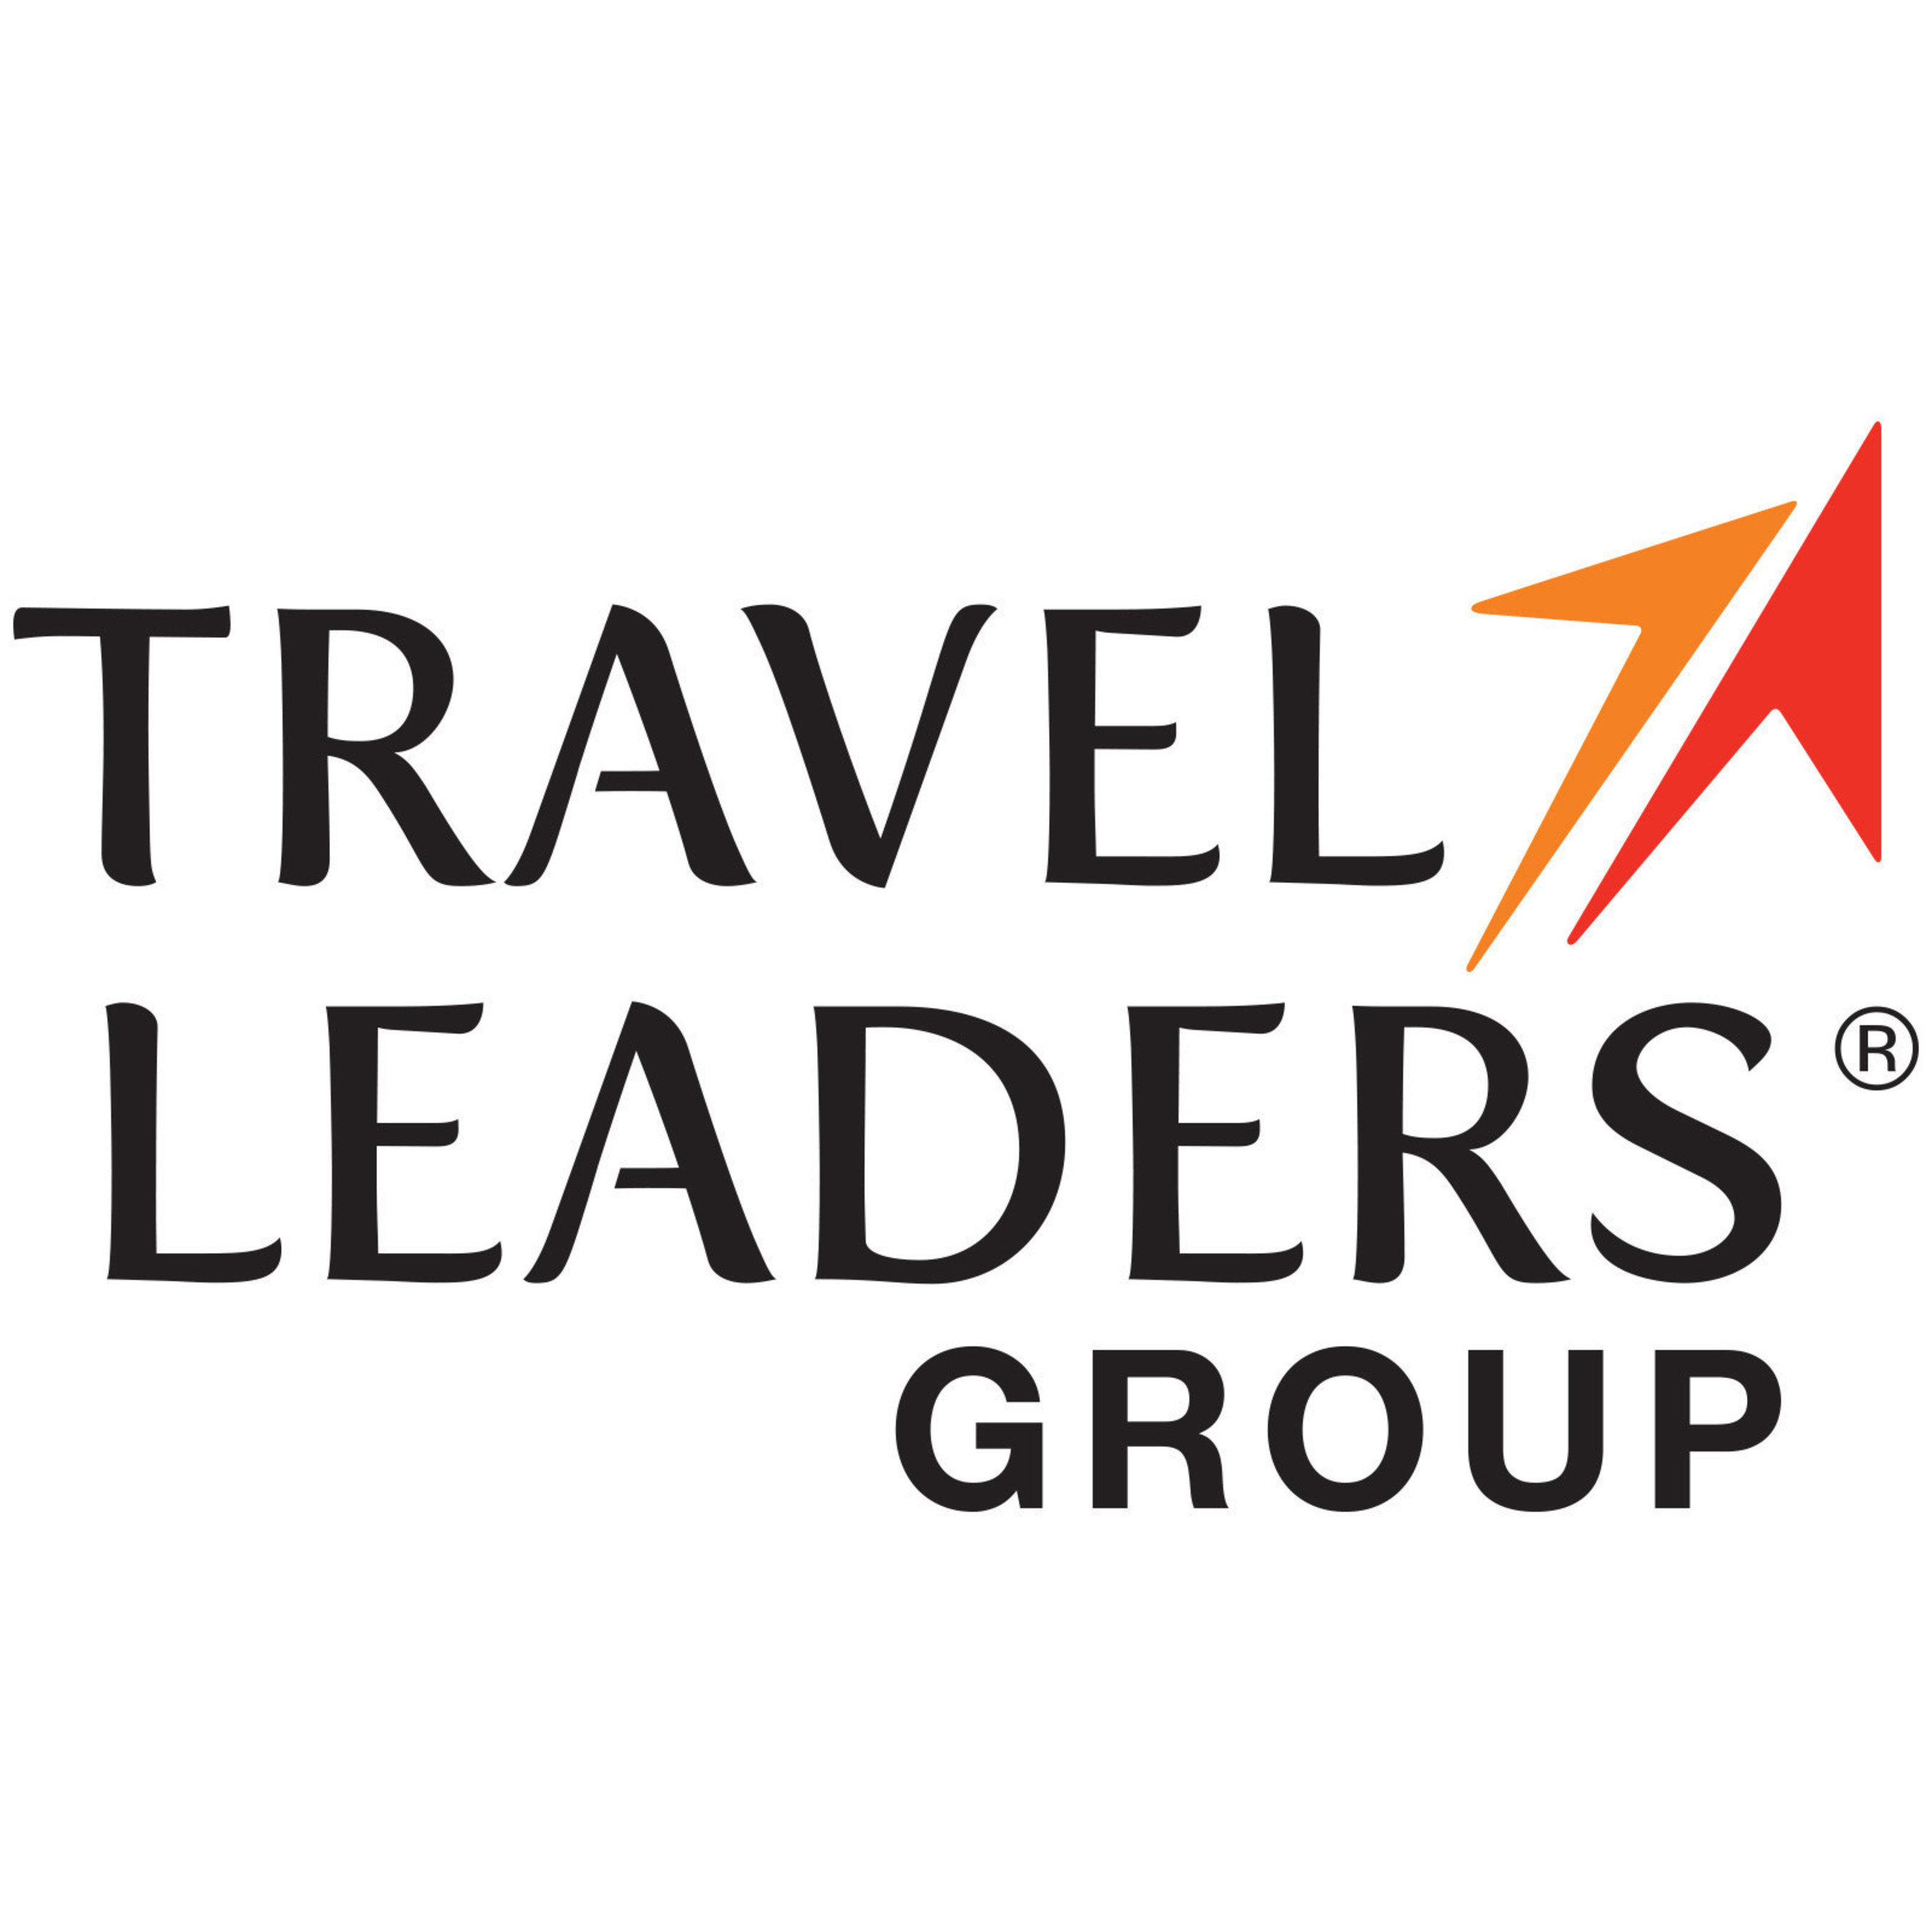 Travel Leaders Group is the largest traditional travel agency company in North America.